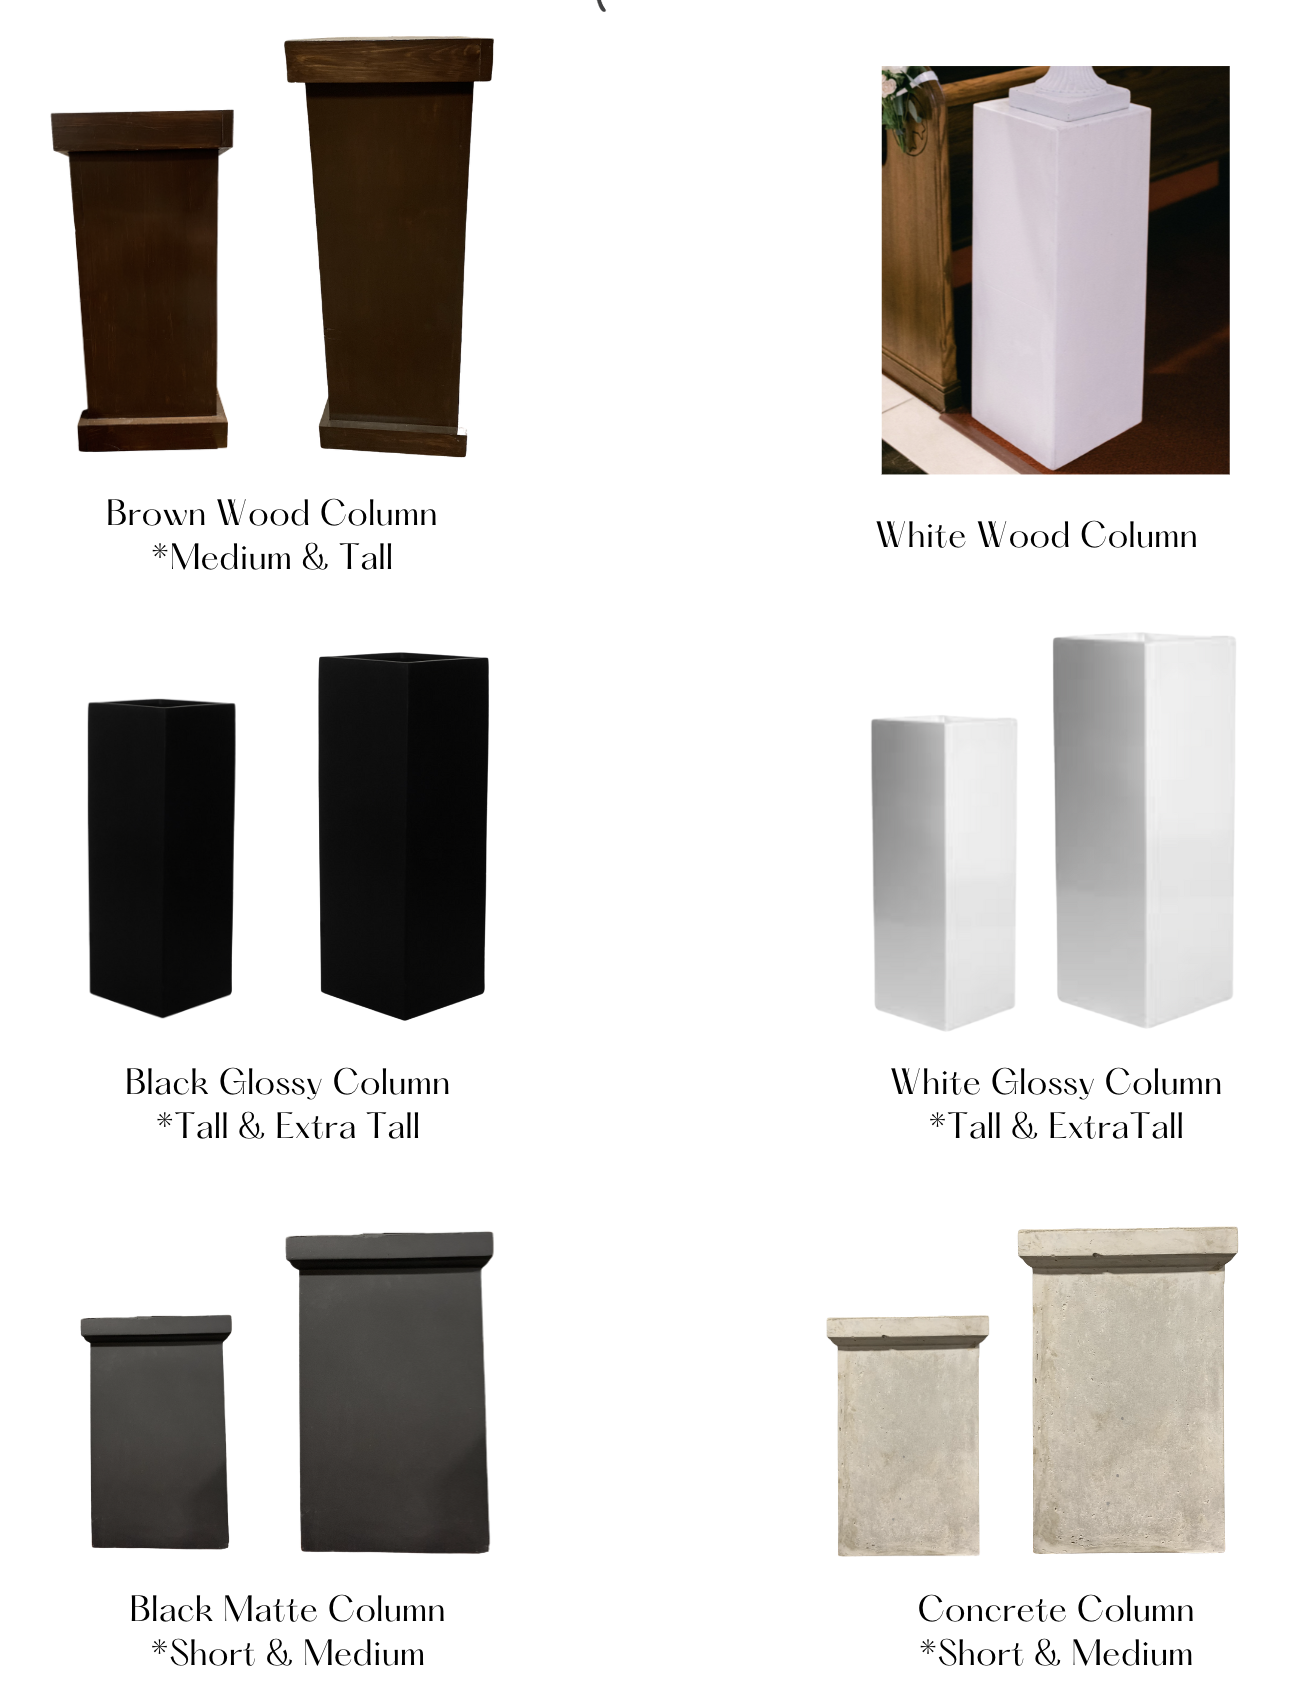 Column options with Bluegrass Chic